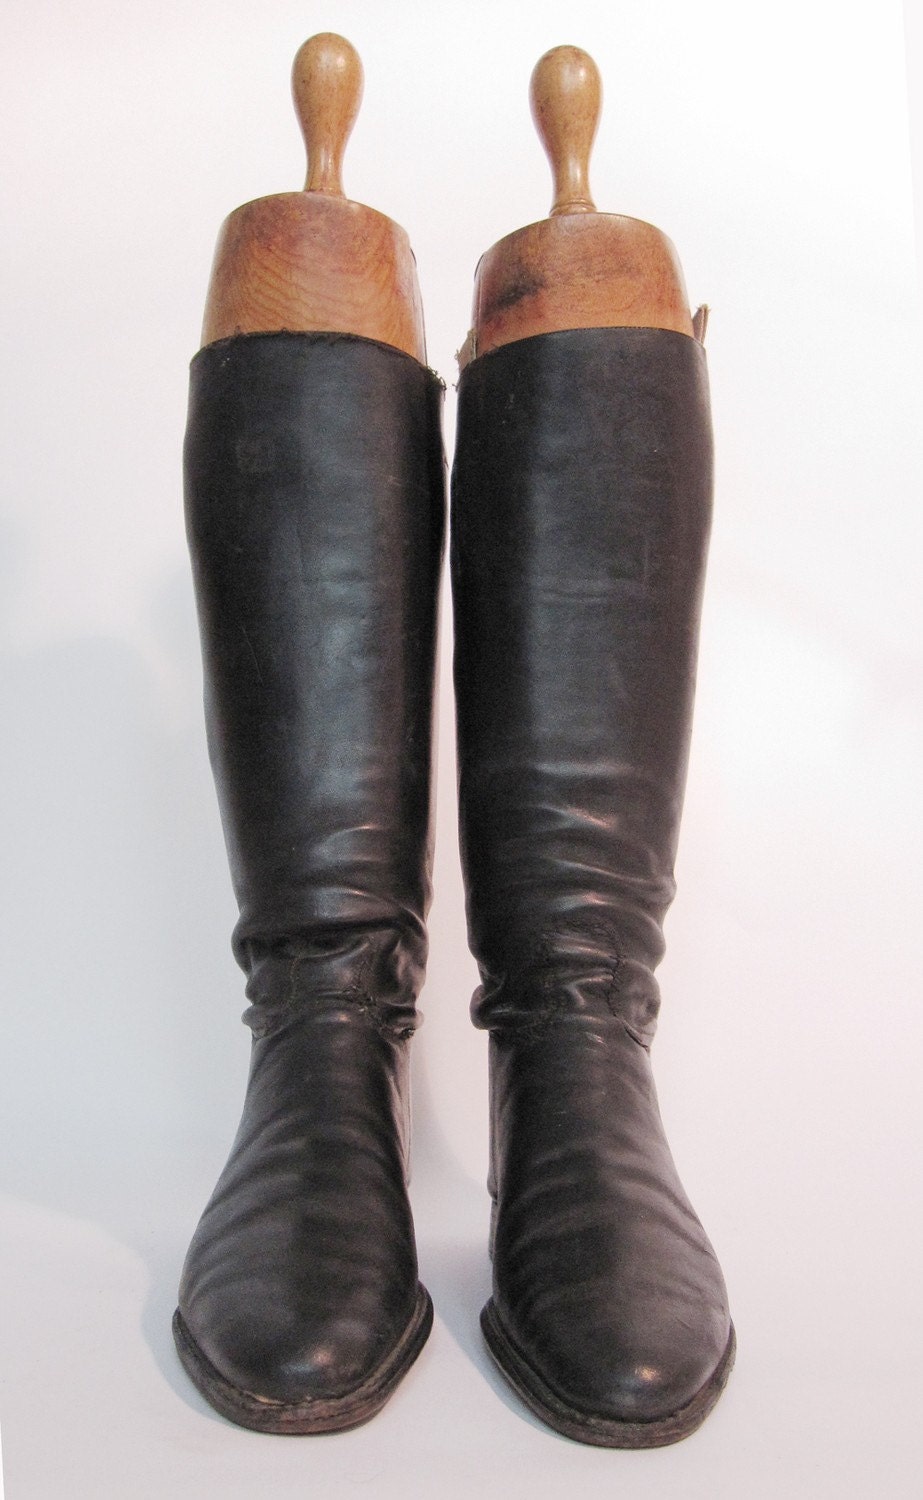 Vintage Peal and Co. Riding Boots with Original Boot Trees